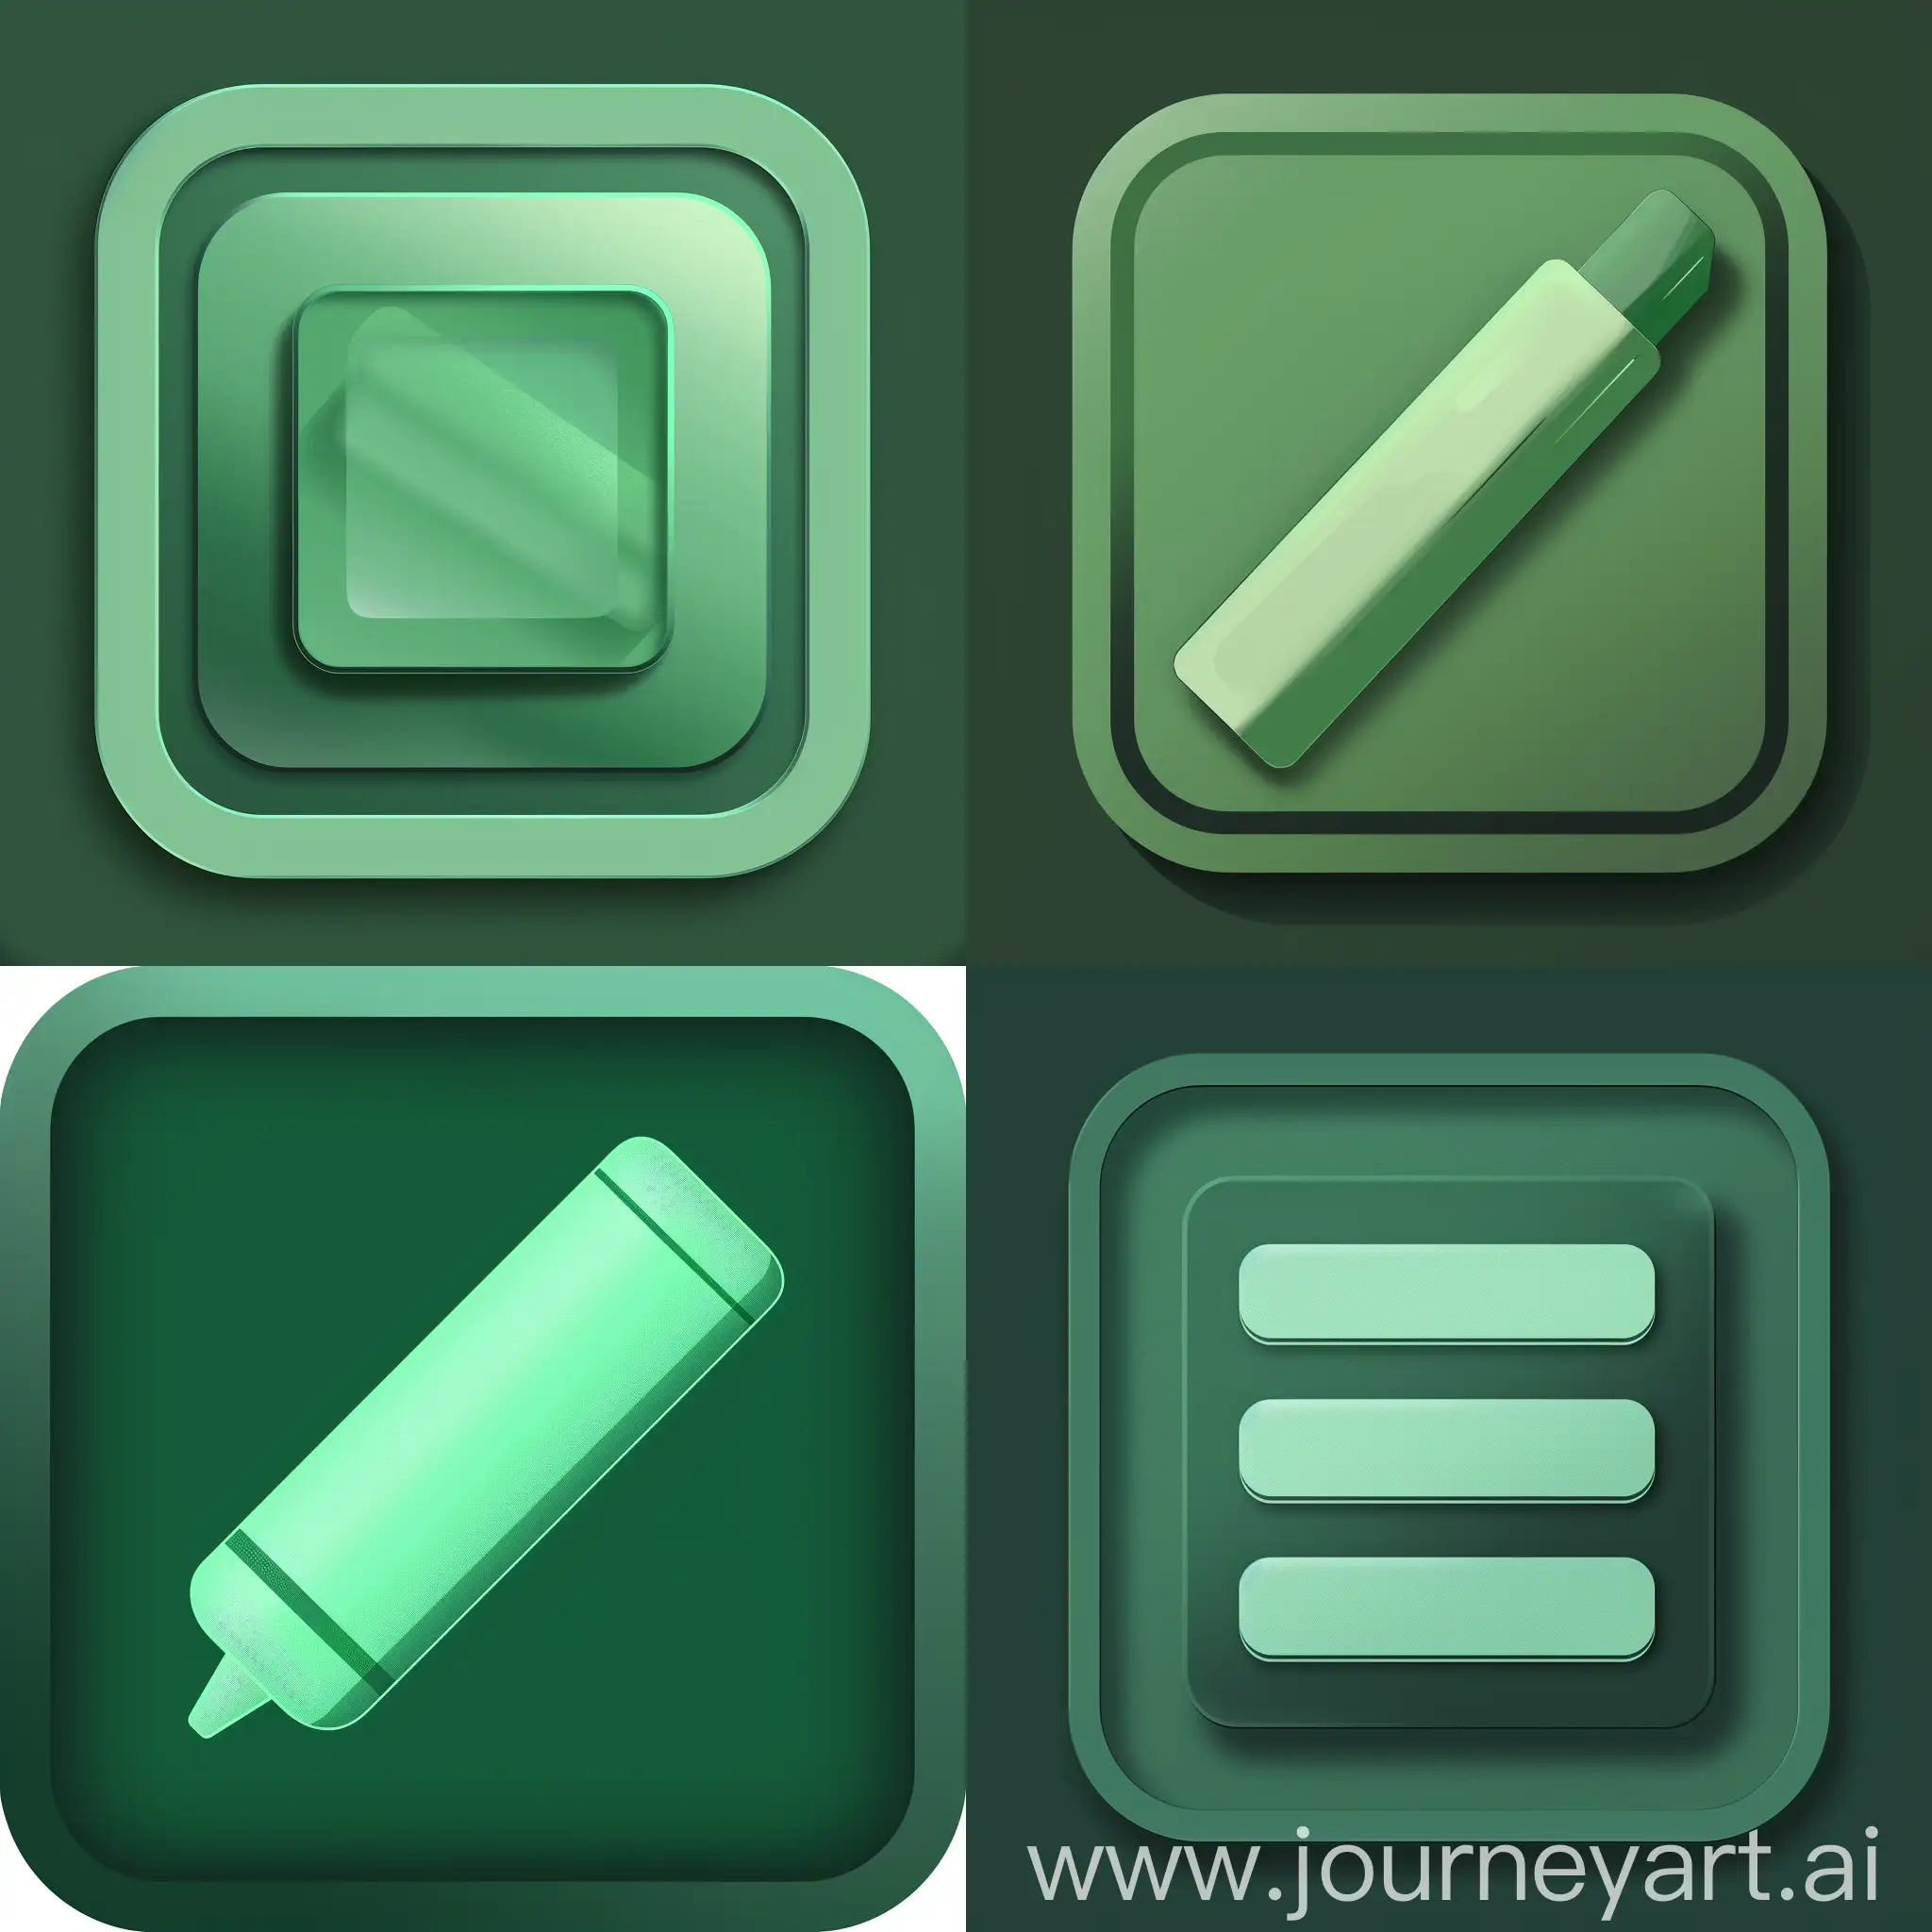 Minimalistic-Green-Eraser-Icon-for-Remove-Objects-App